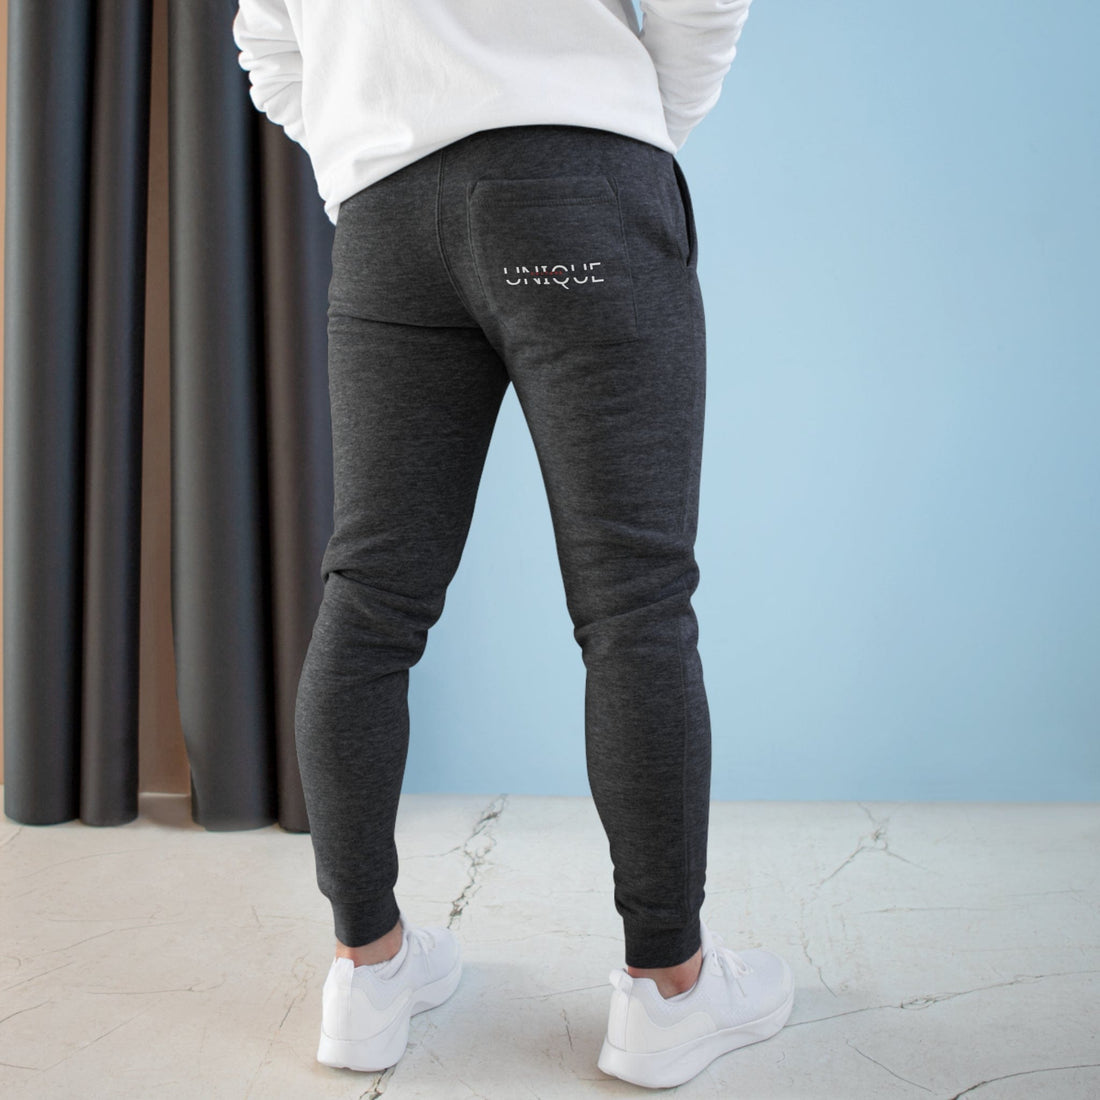 Unique Kulture Designer Fleece Joggers - Unisex, premium-quality joggers made from a soft blend of 80% combed ringspun cotton and 20% polyester in a medium-heavy fabric weight (8.25 oz/yd²). Features two spacious side pockets, a customizable back pocket, soft 3-end fleece construction, and ribbed bottom and waistband cuffs for a secure fit. Perfect for an active lifestyle or lounging, these stylish and comfortable joggers offer a customizable back pocket for personalization.